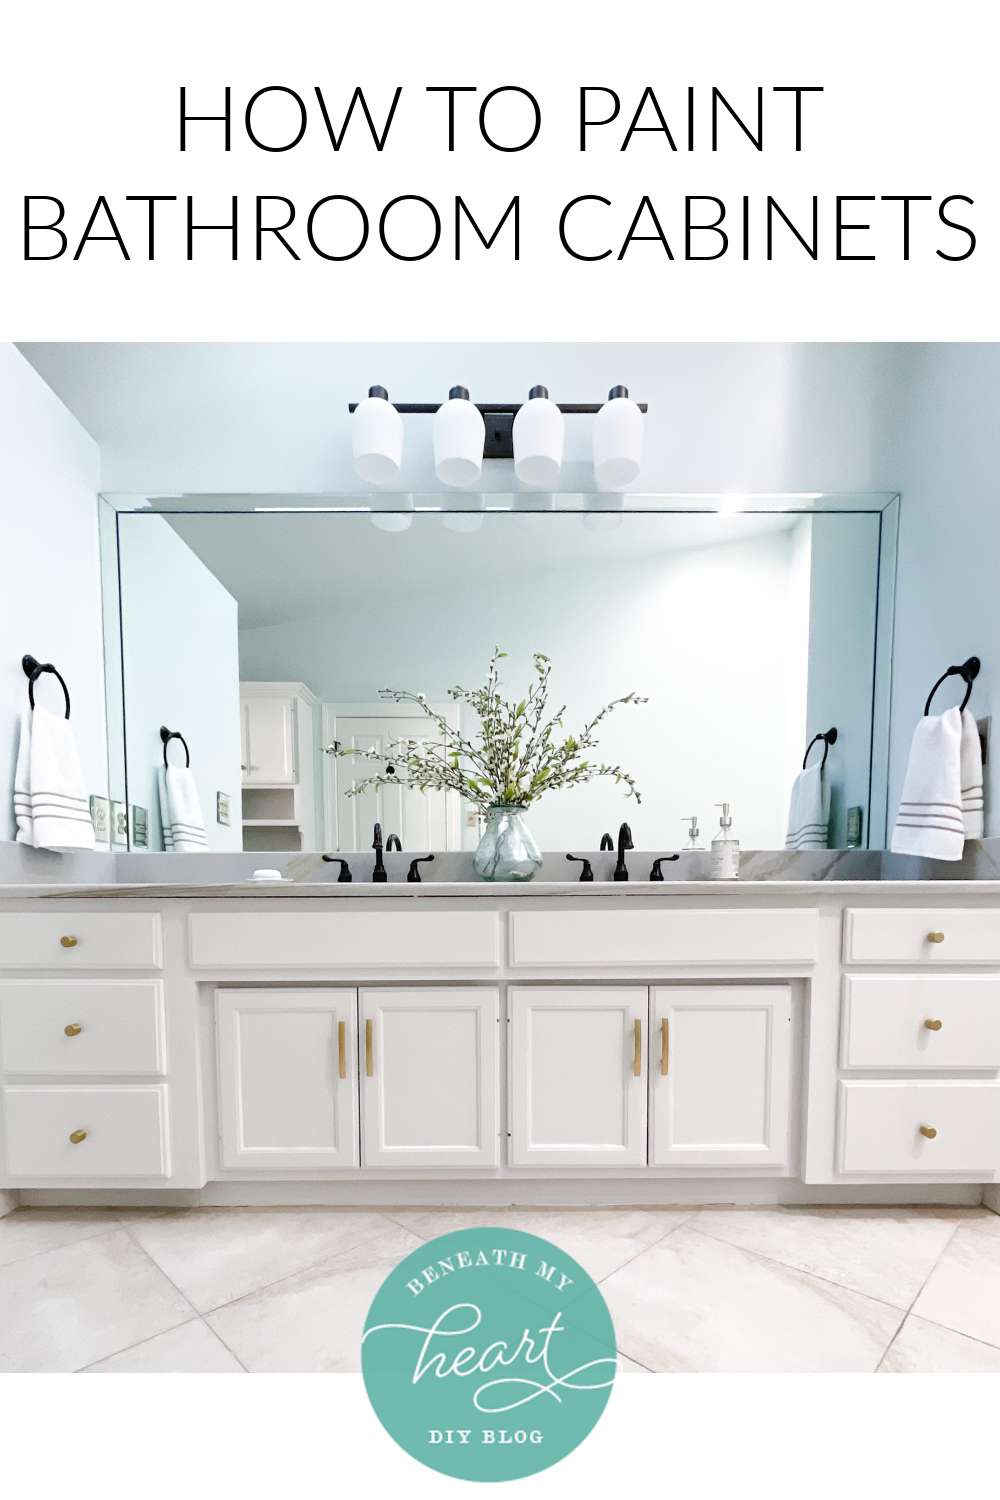 HOW TO PAINT BATHROOM CABINETS